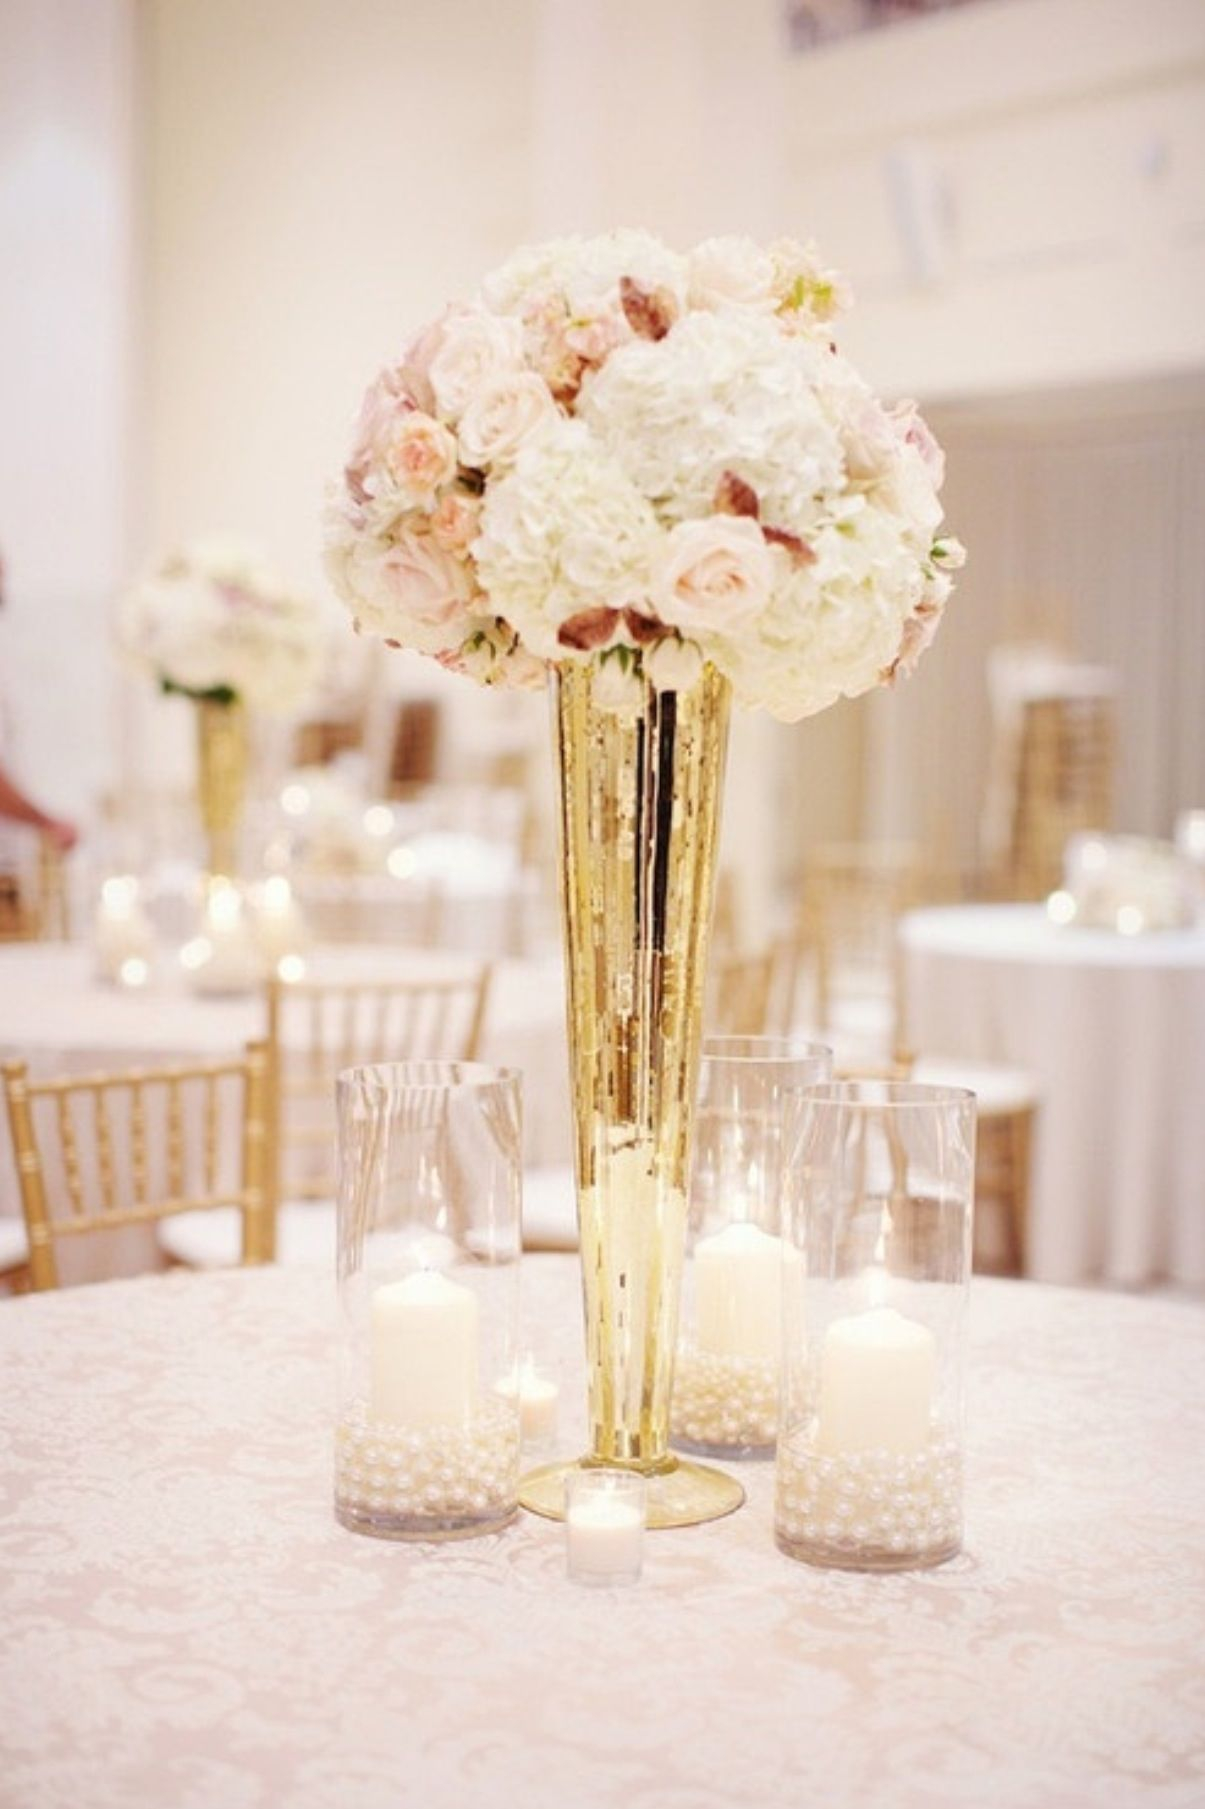 Tall Mercury Glass Centerpieces If Not Using Gold Table in dimensions 1205 X 1809